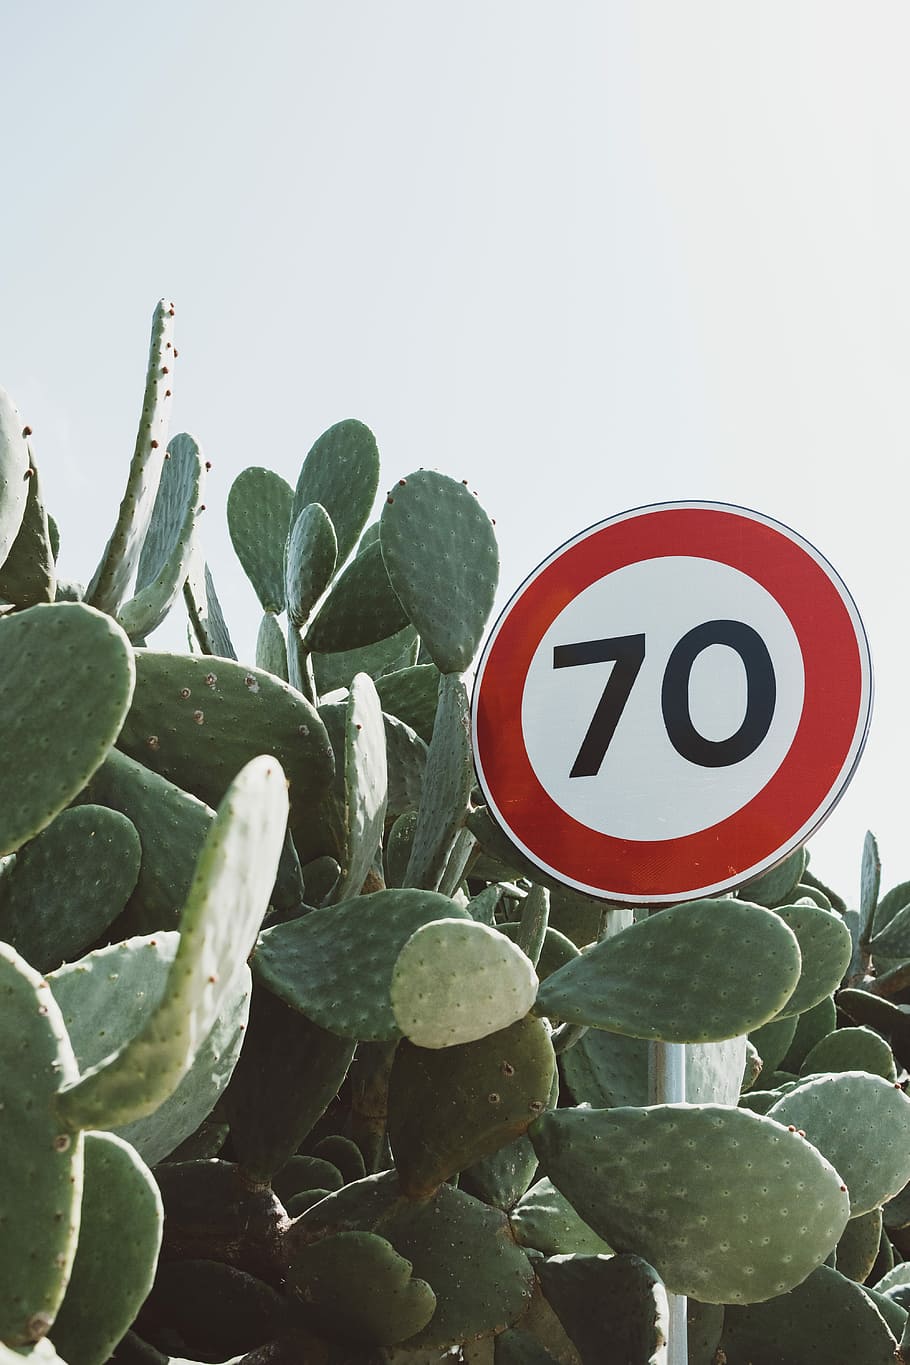 70 road sign surrounded by bunny ear cactus plant, signage beside cactus